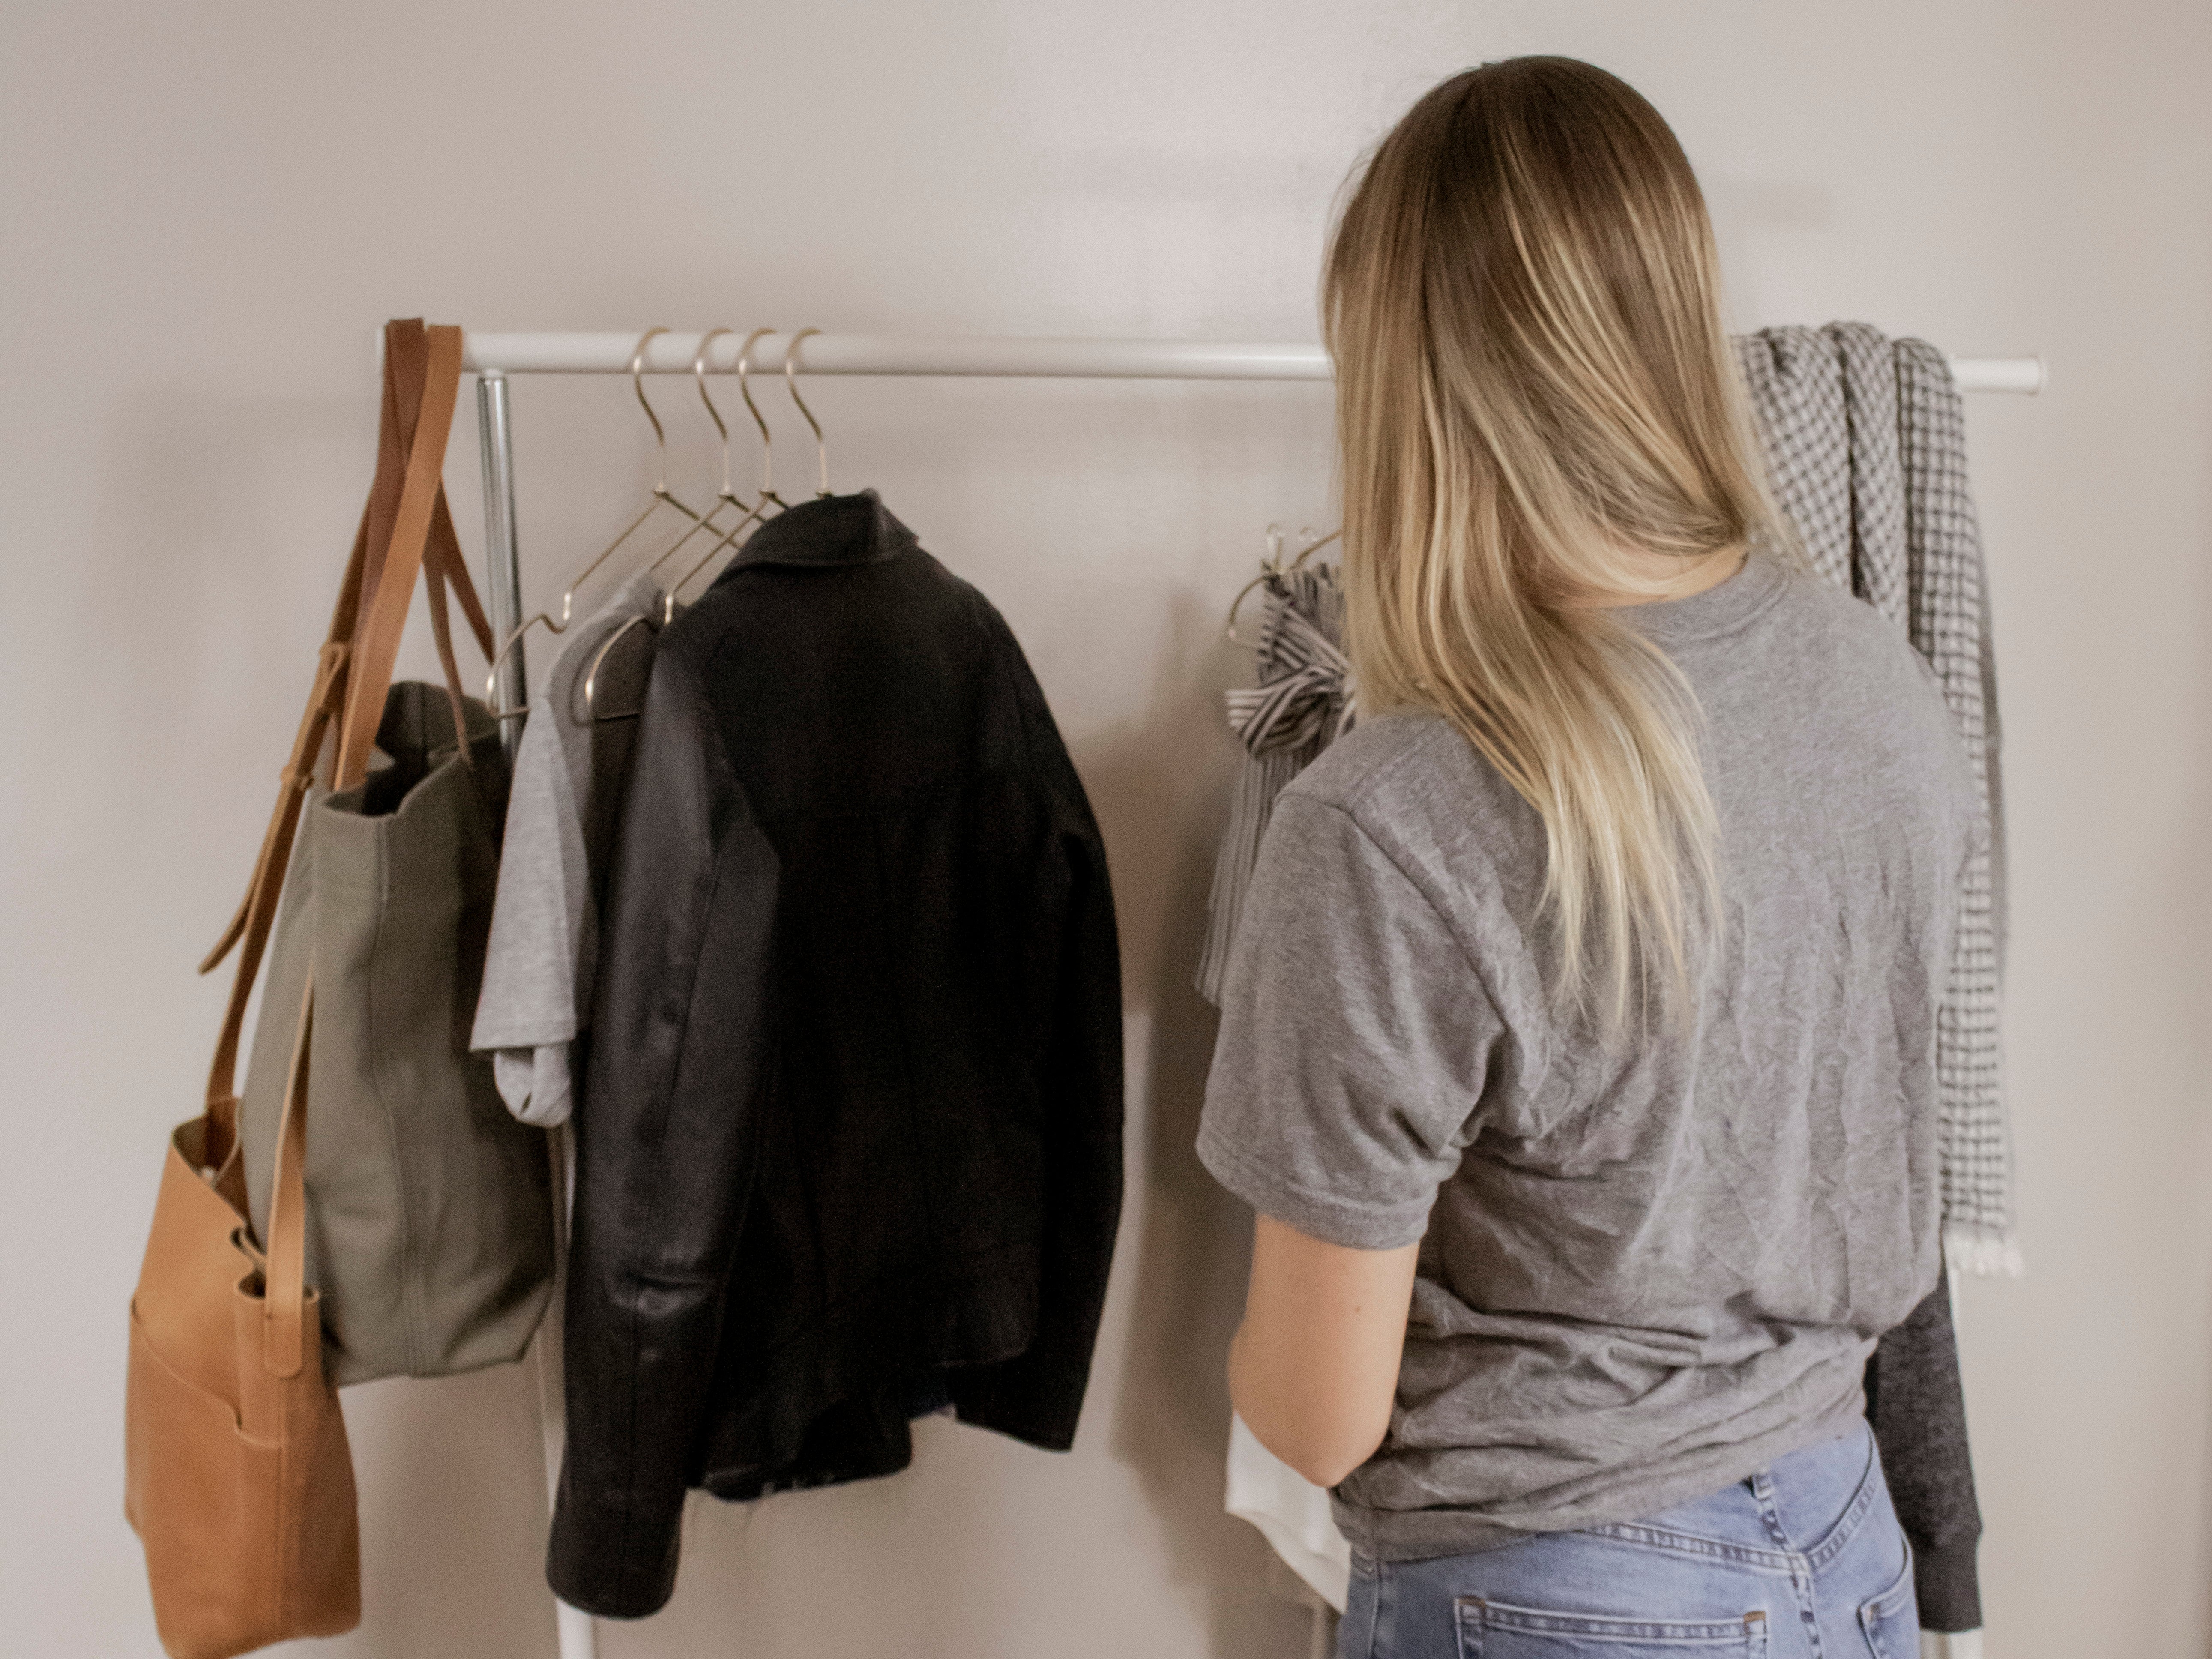 Here's How To Evaluate Your Wardrobe During a Closet Cleanout